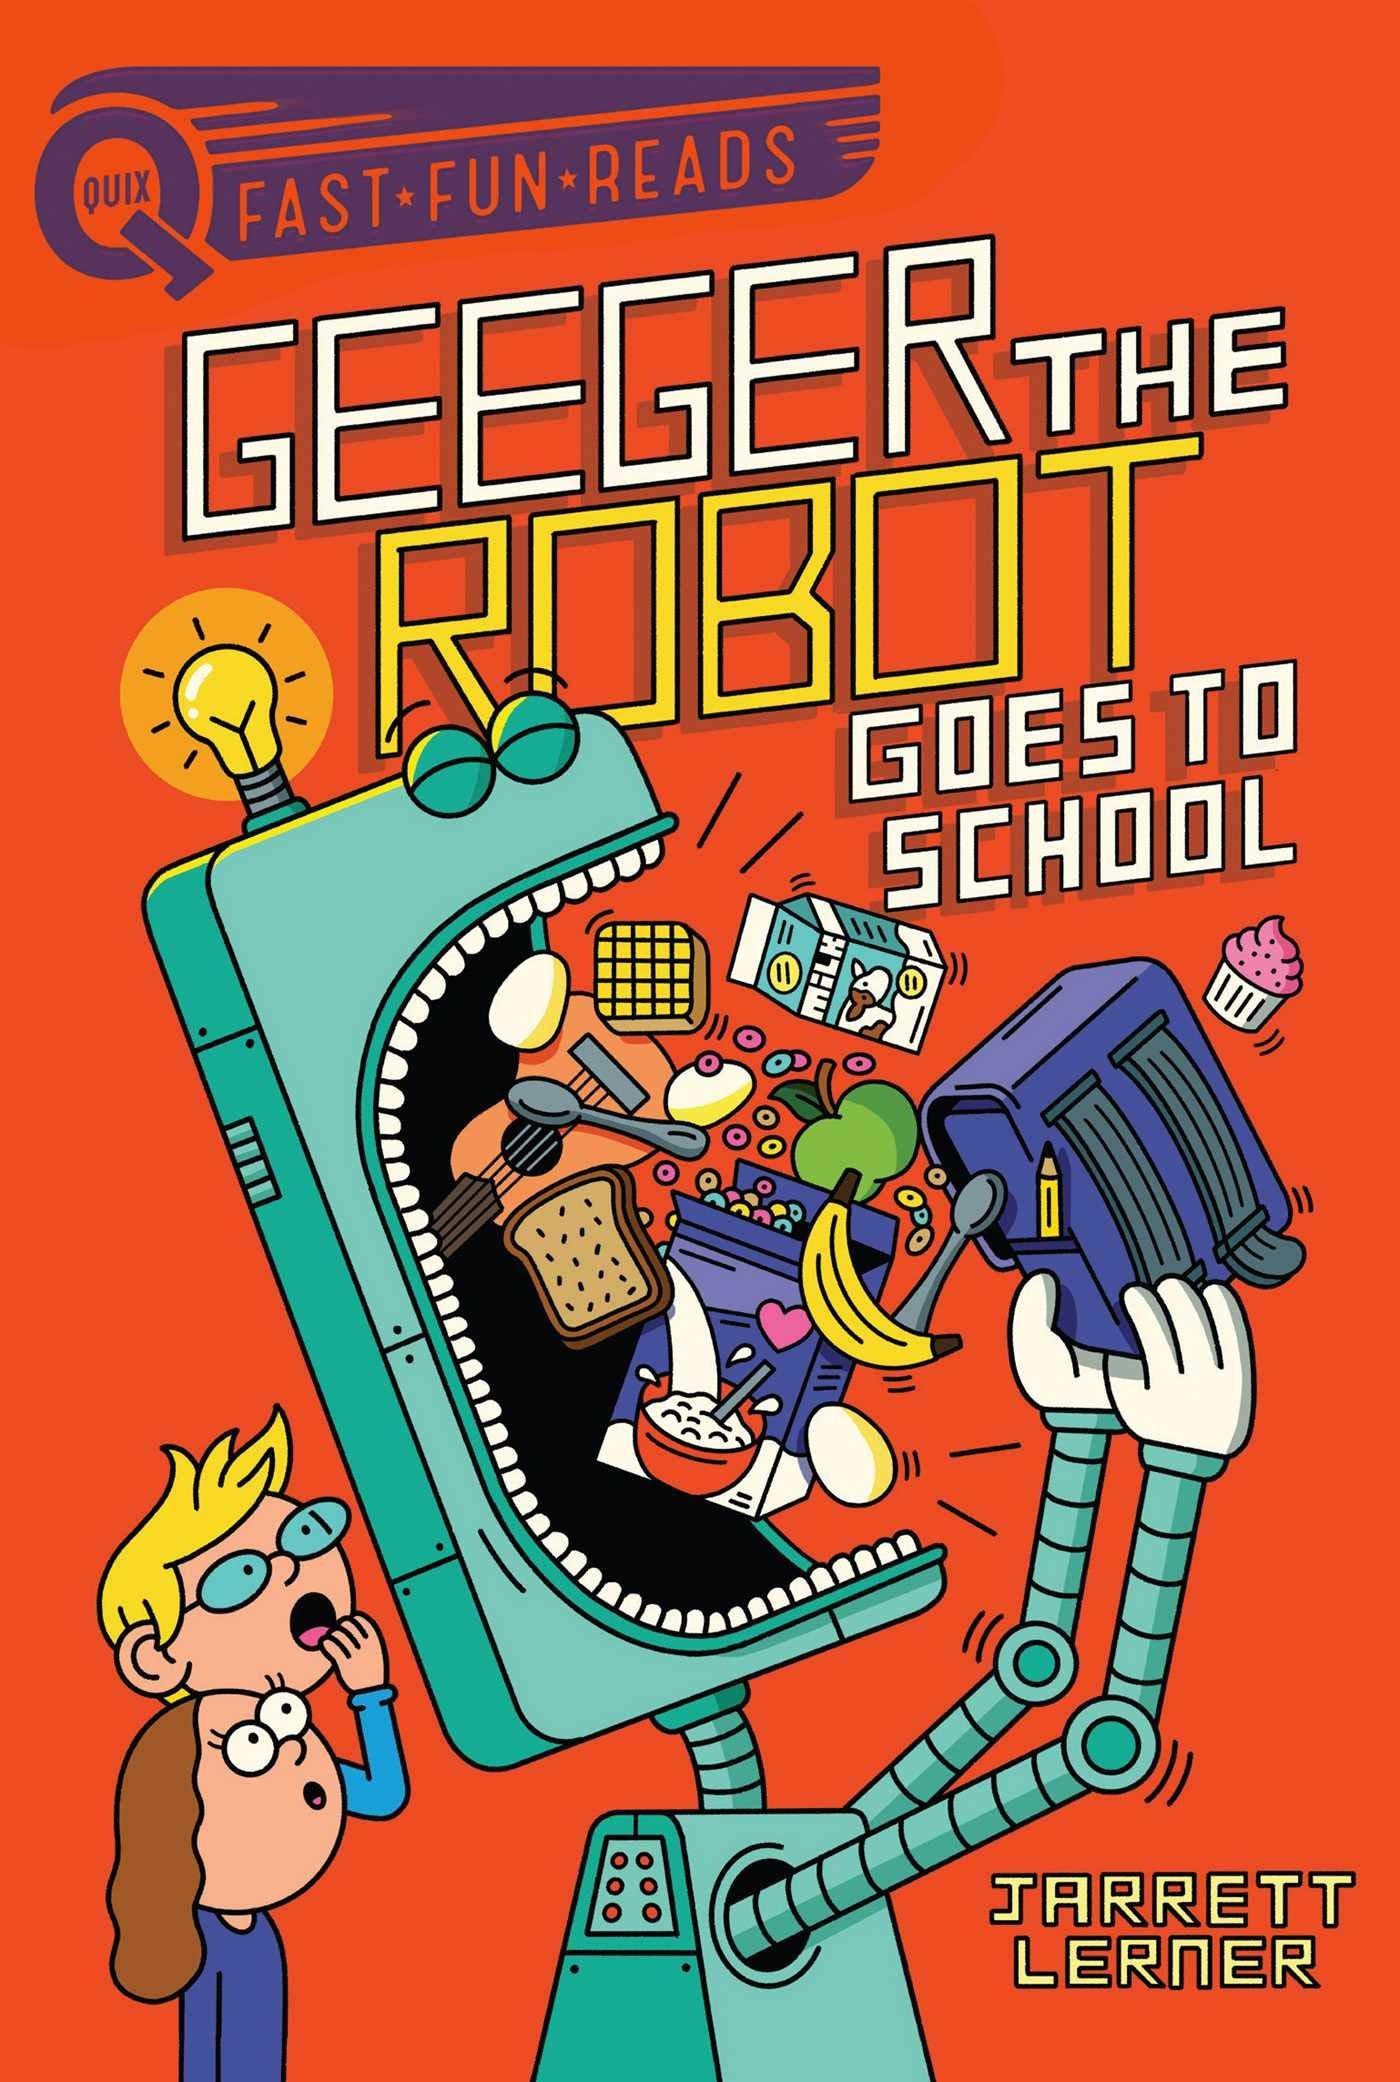 Geeger the Robot Goes to school...with human kids! His zany misunderstandings lead to memorable mishaps.